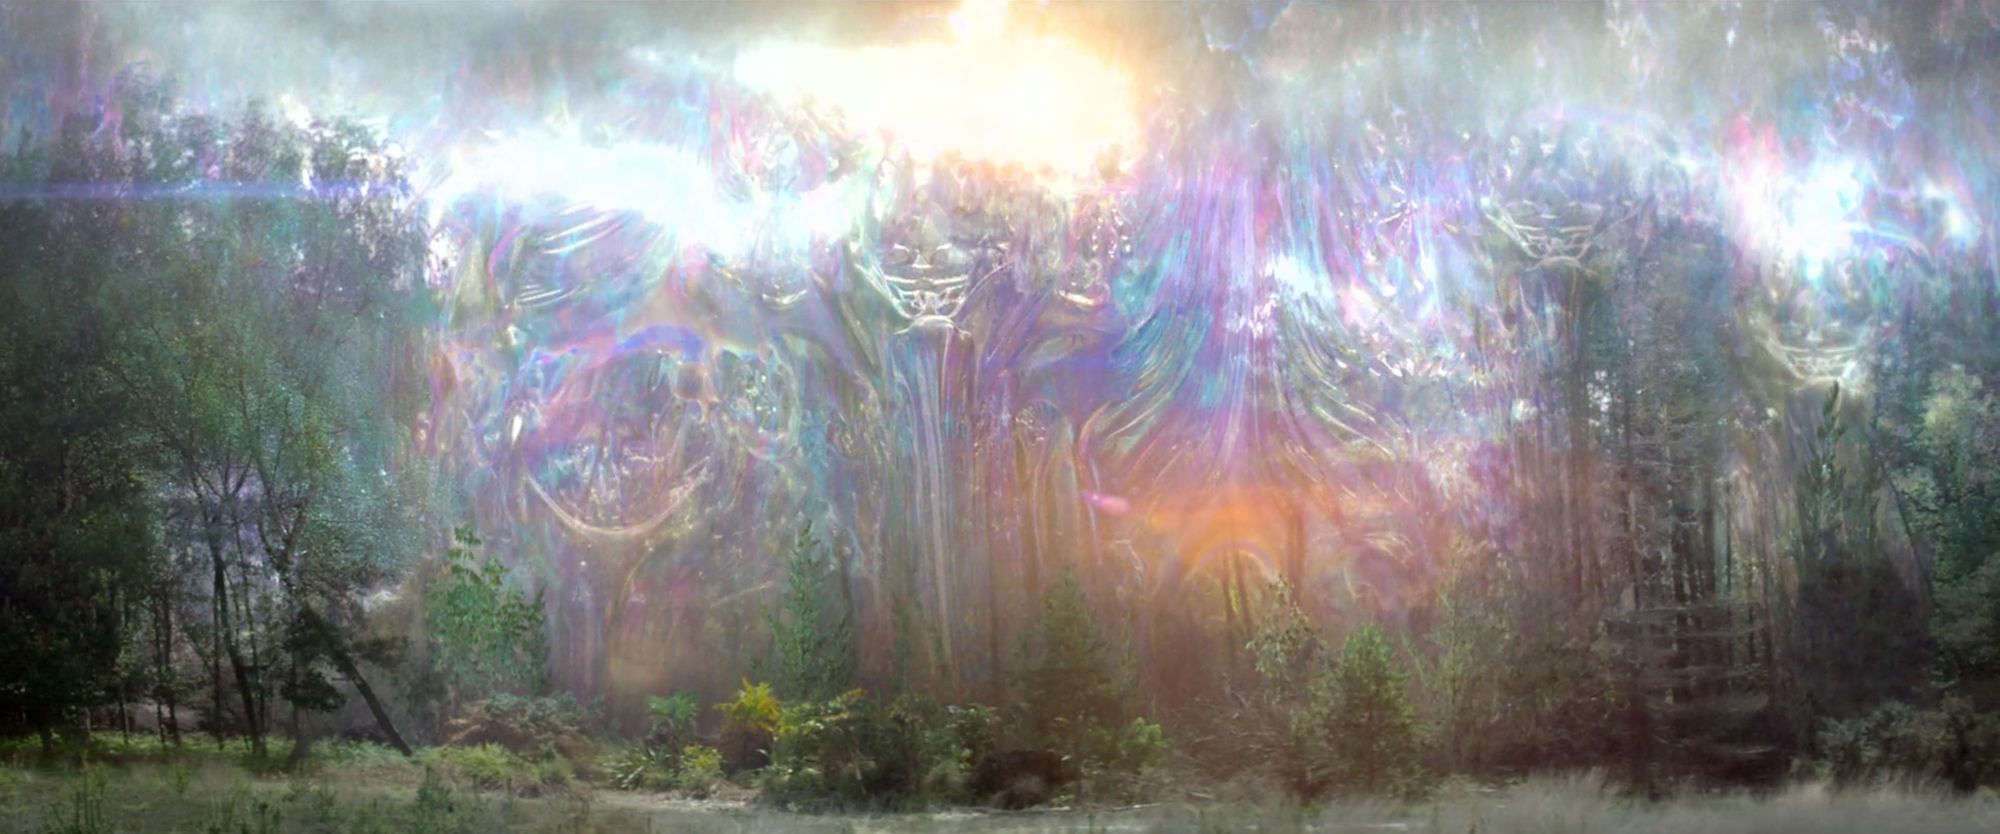 Annihilation (2018): A Journey Into Nature's Supreme Power and The Fear of Change